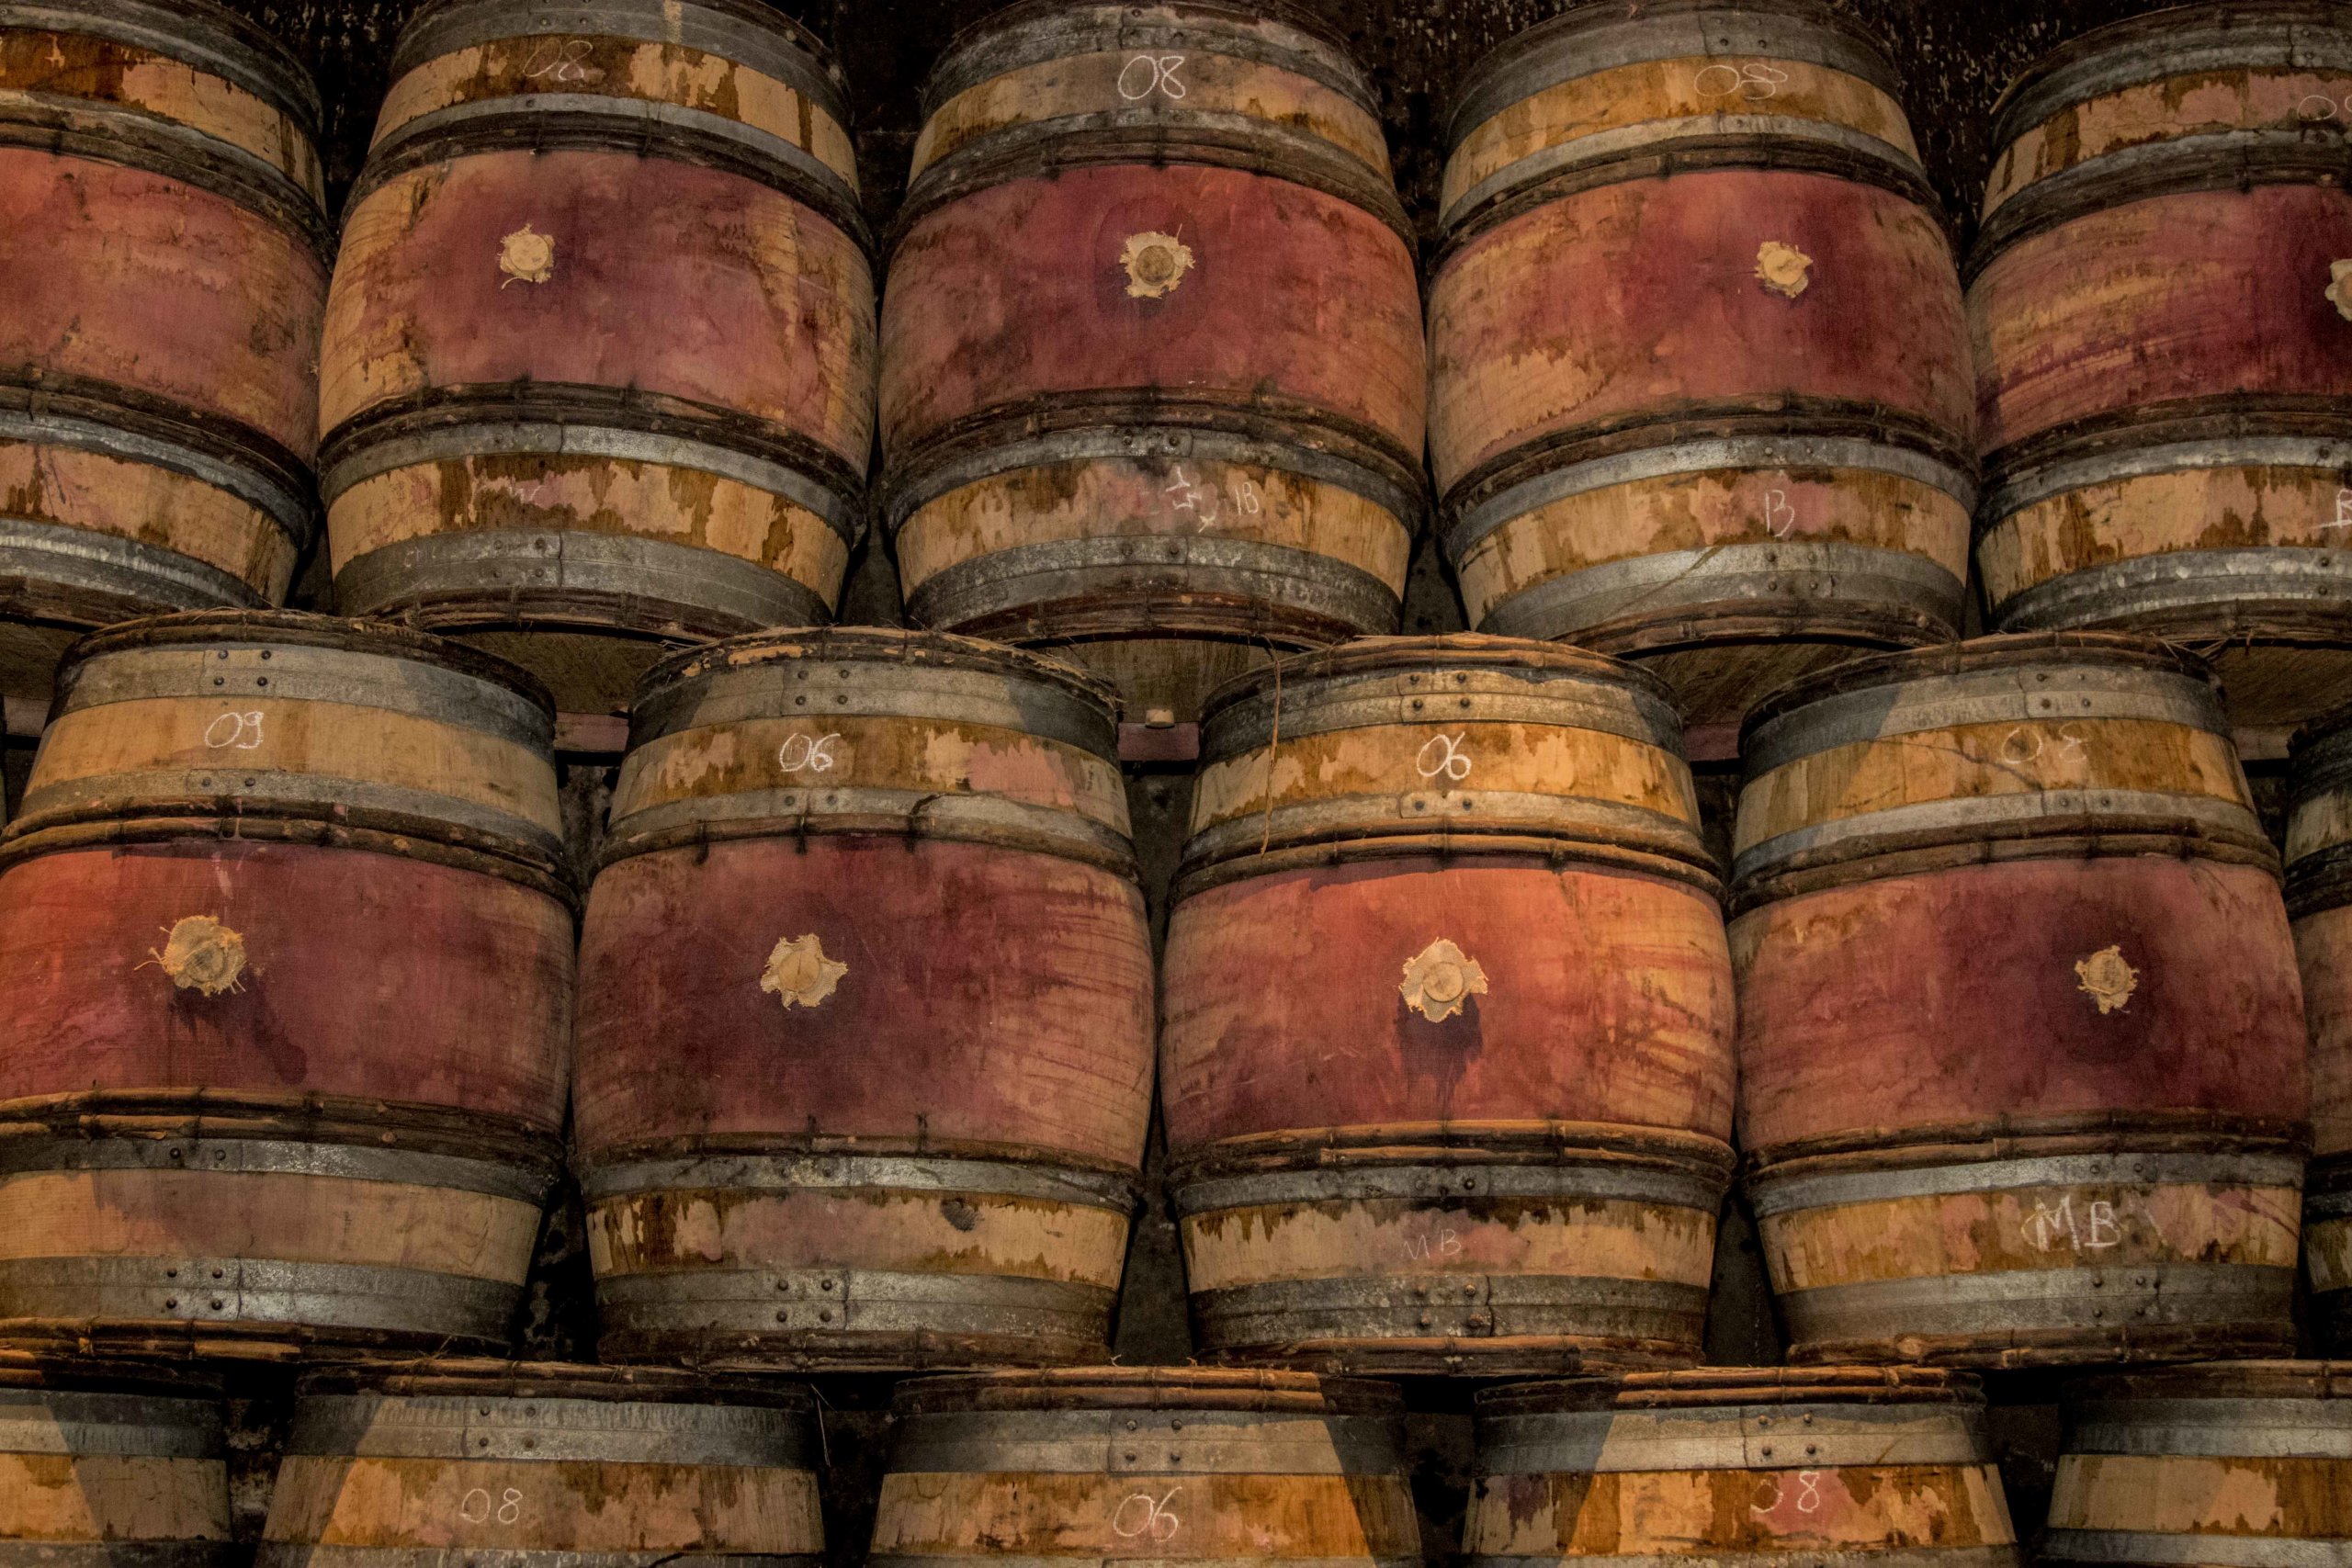 Barrels in the Roumier cellar